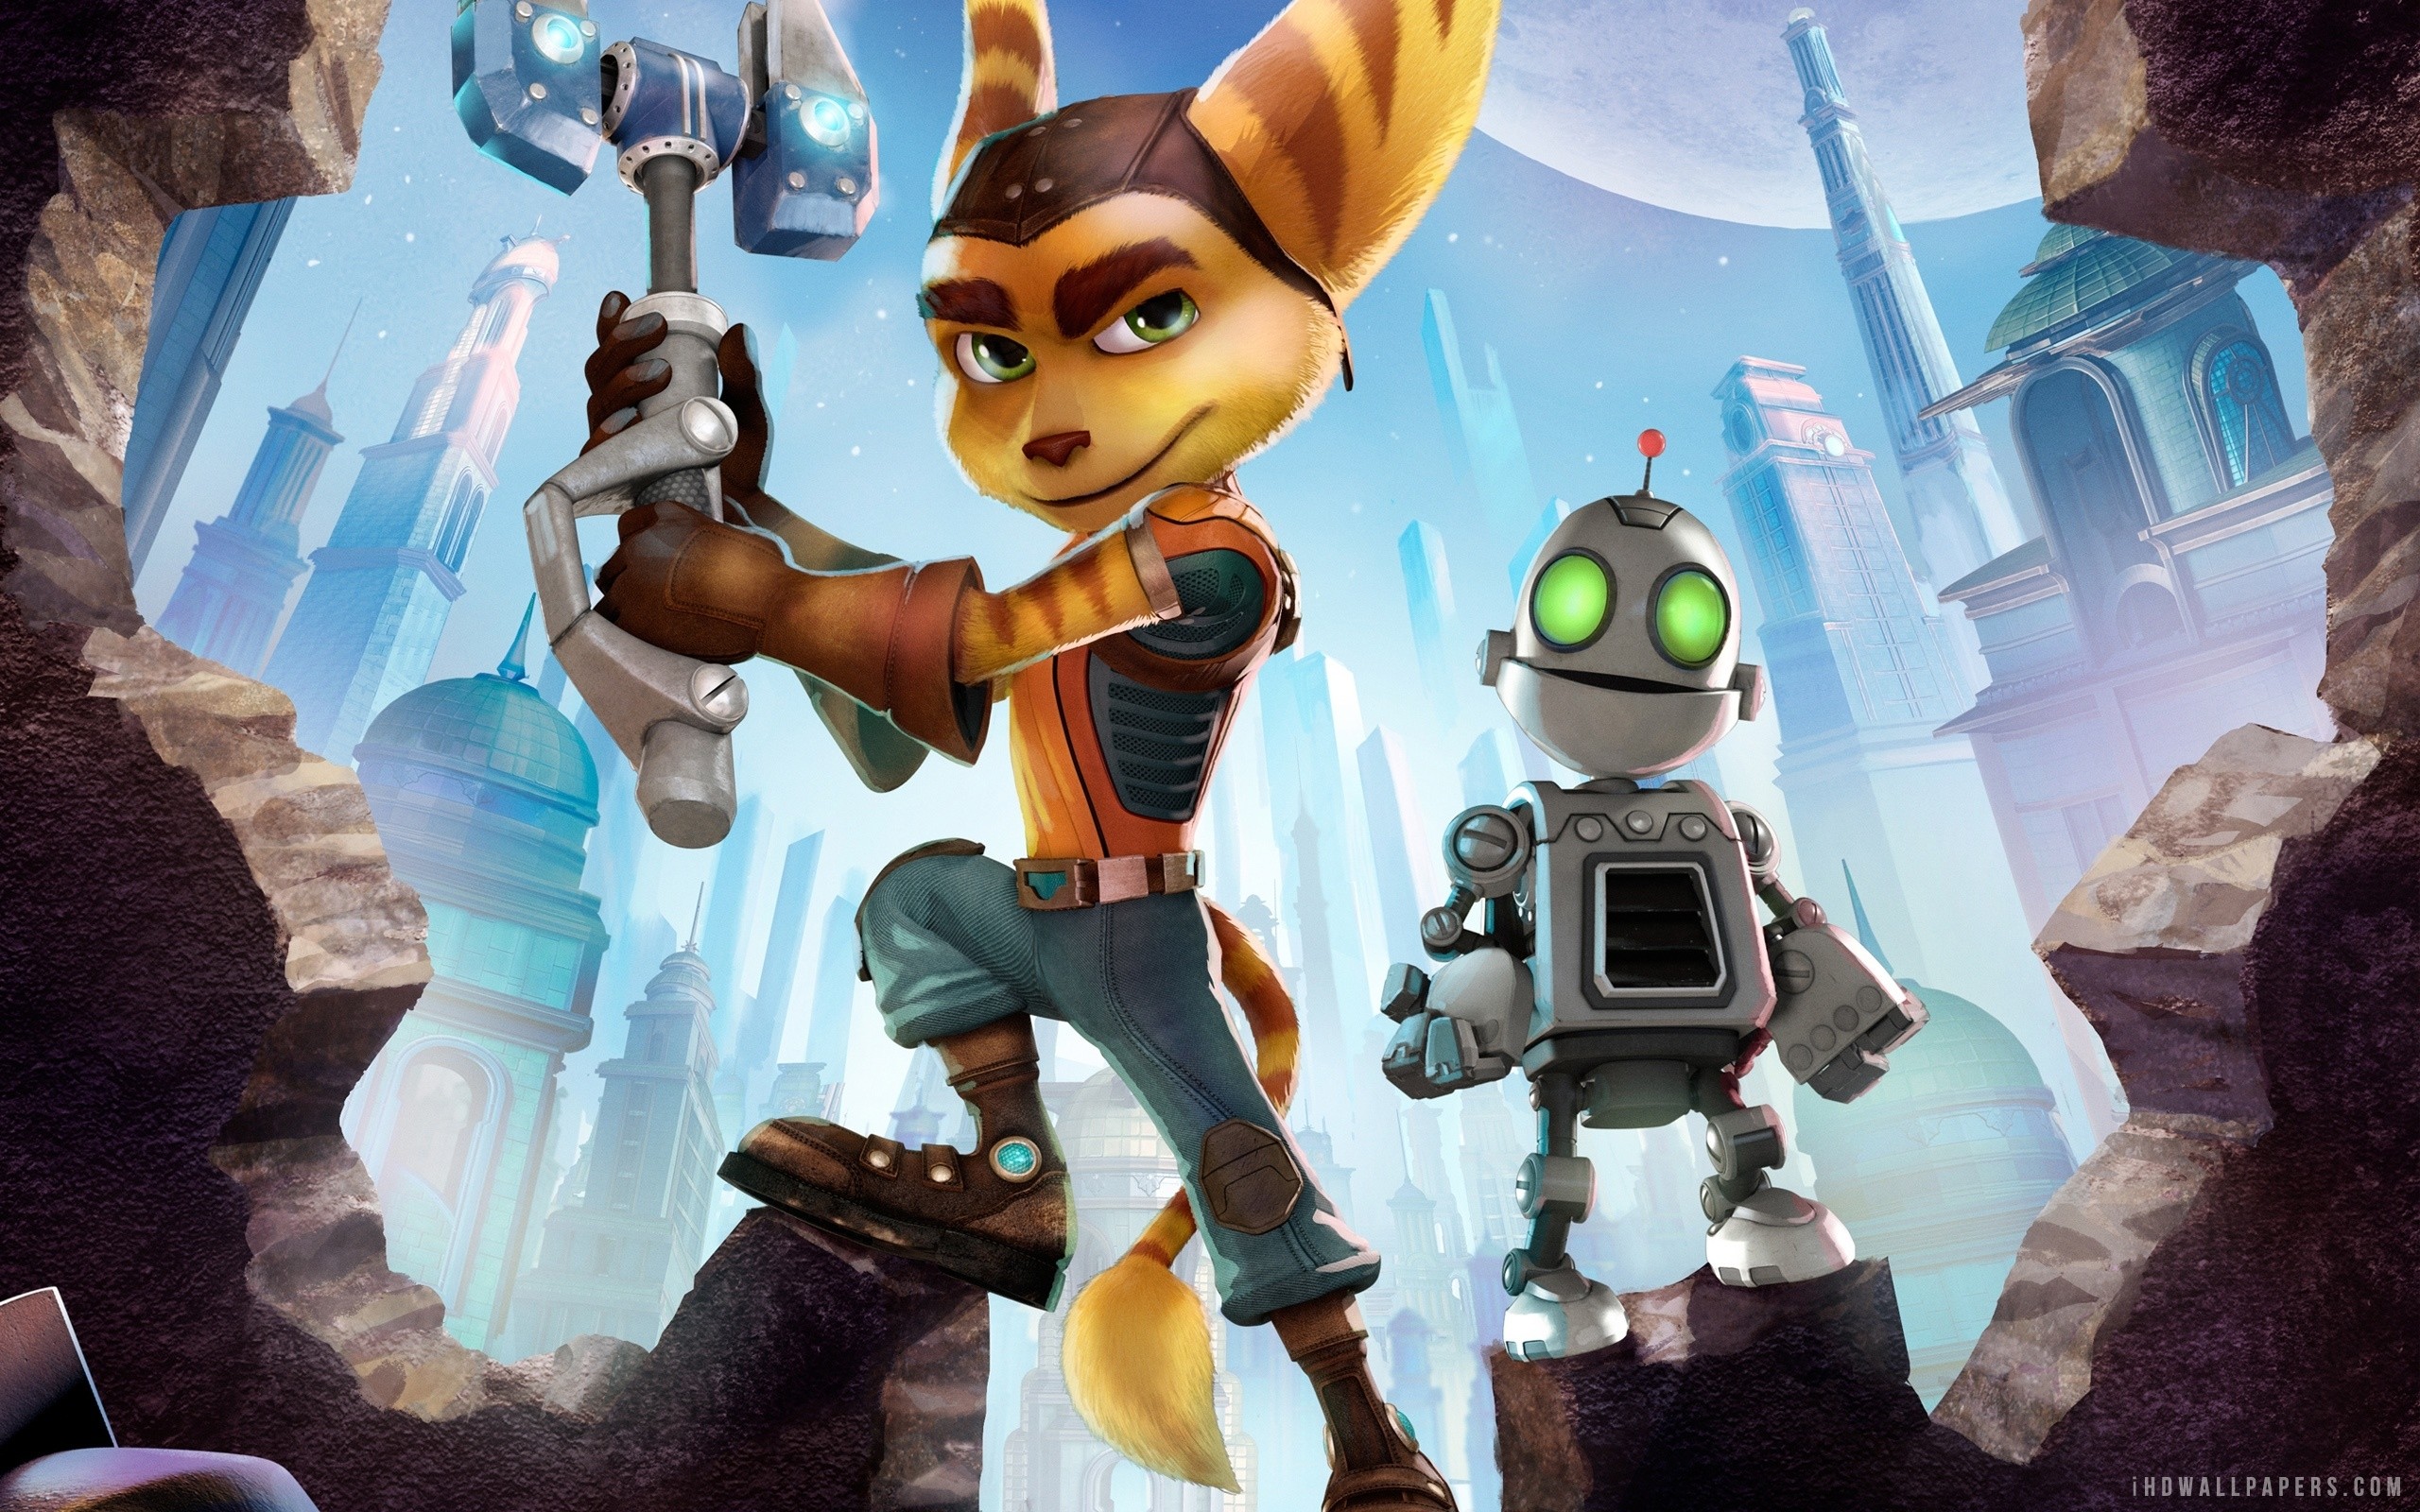 2560x1600 Title : ratchet &amp; clank movie 2016 wallpaper | movies and tv  series. Dimension : 2560 x 1600. File Type : JPG/JPEG